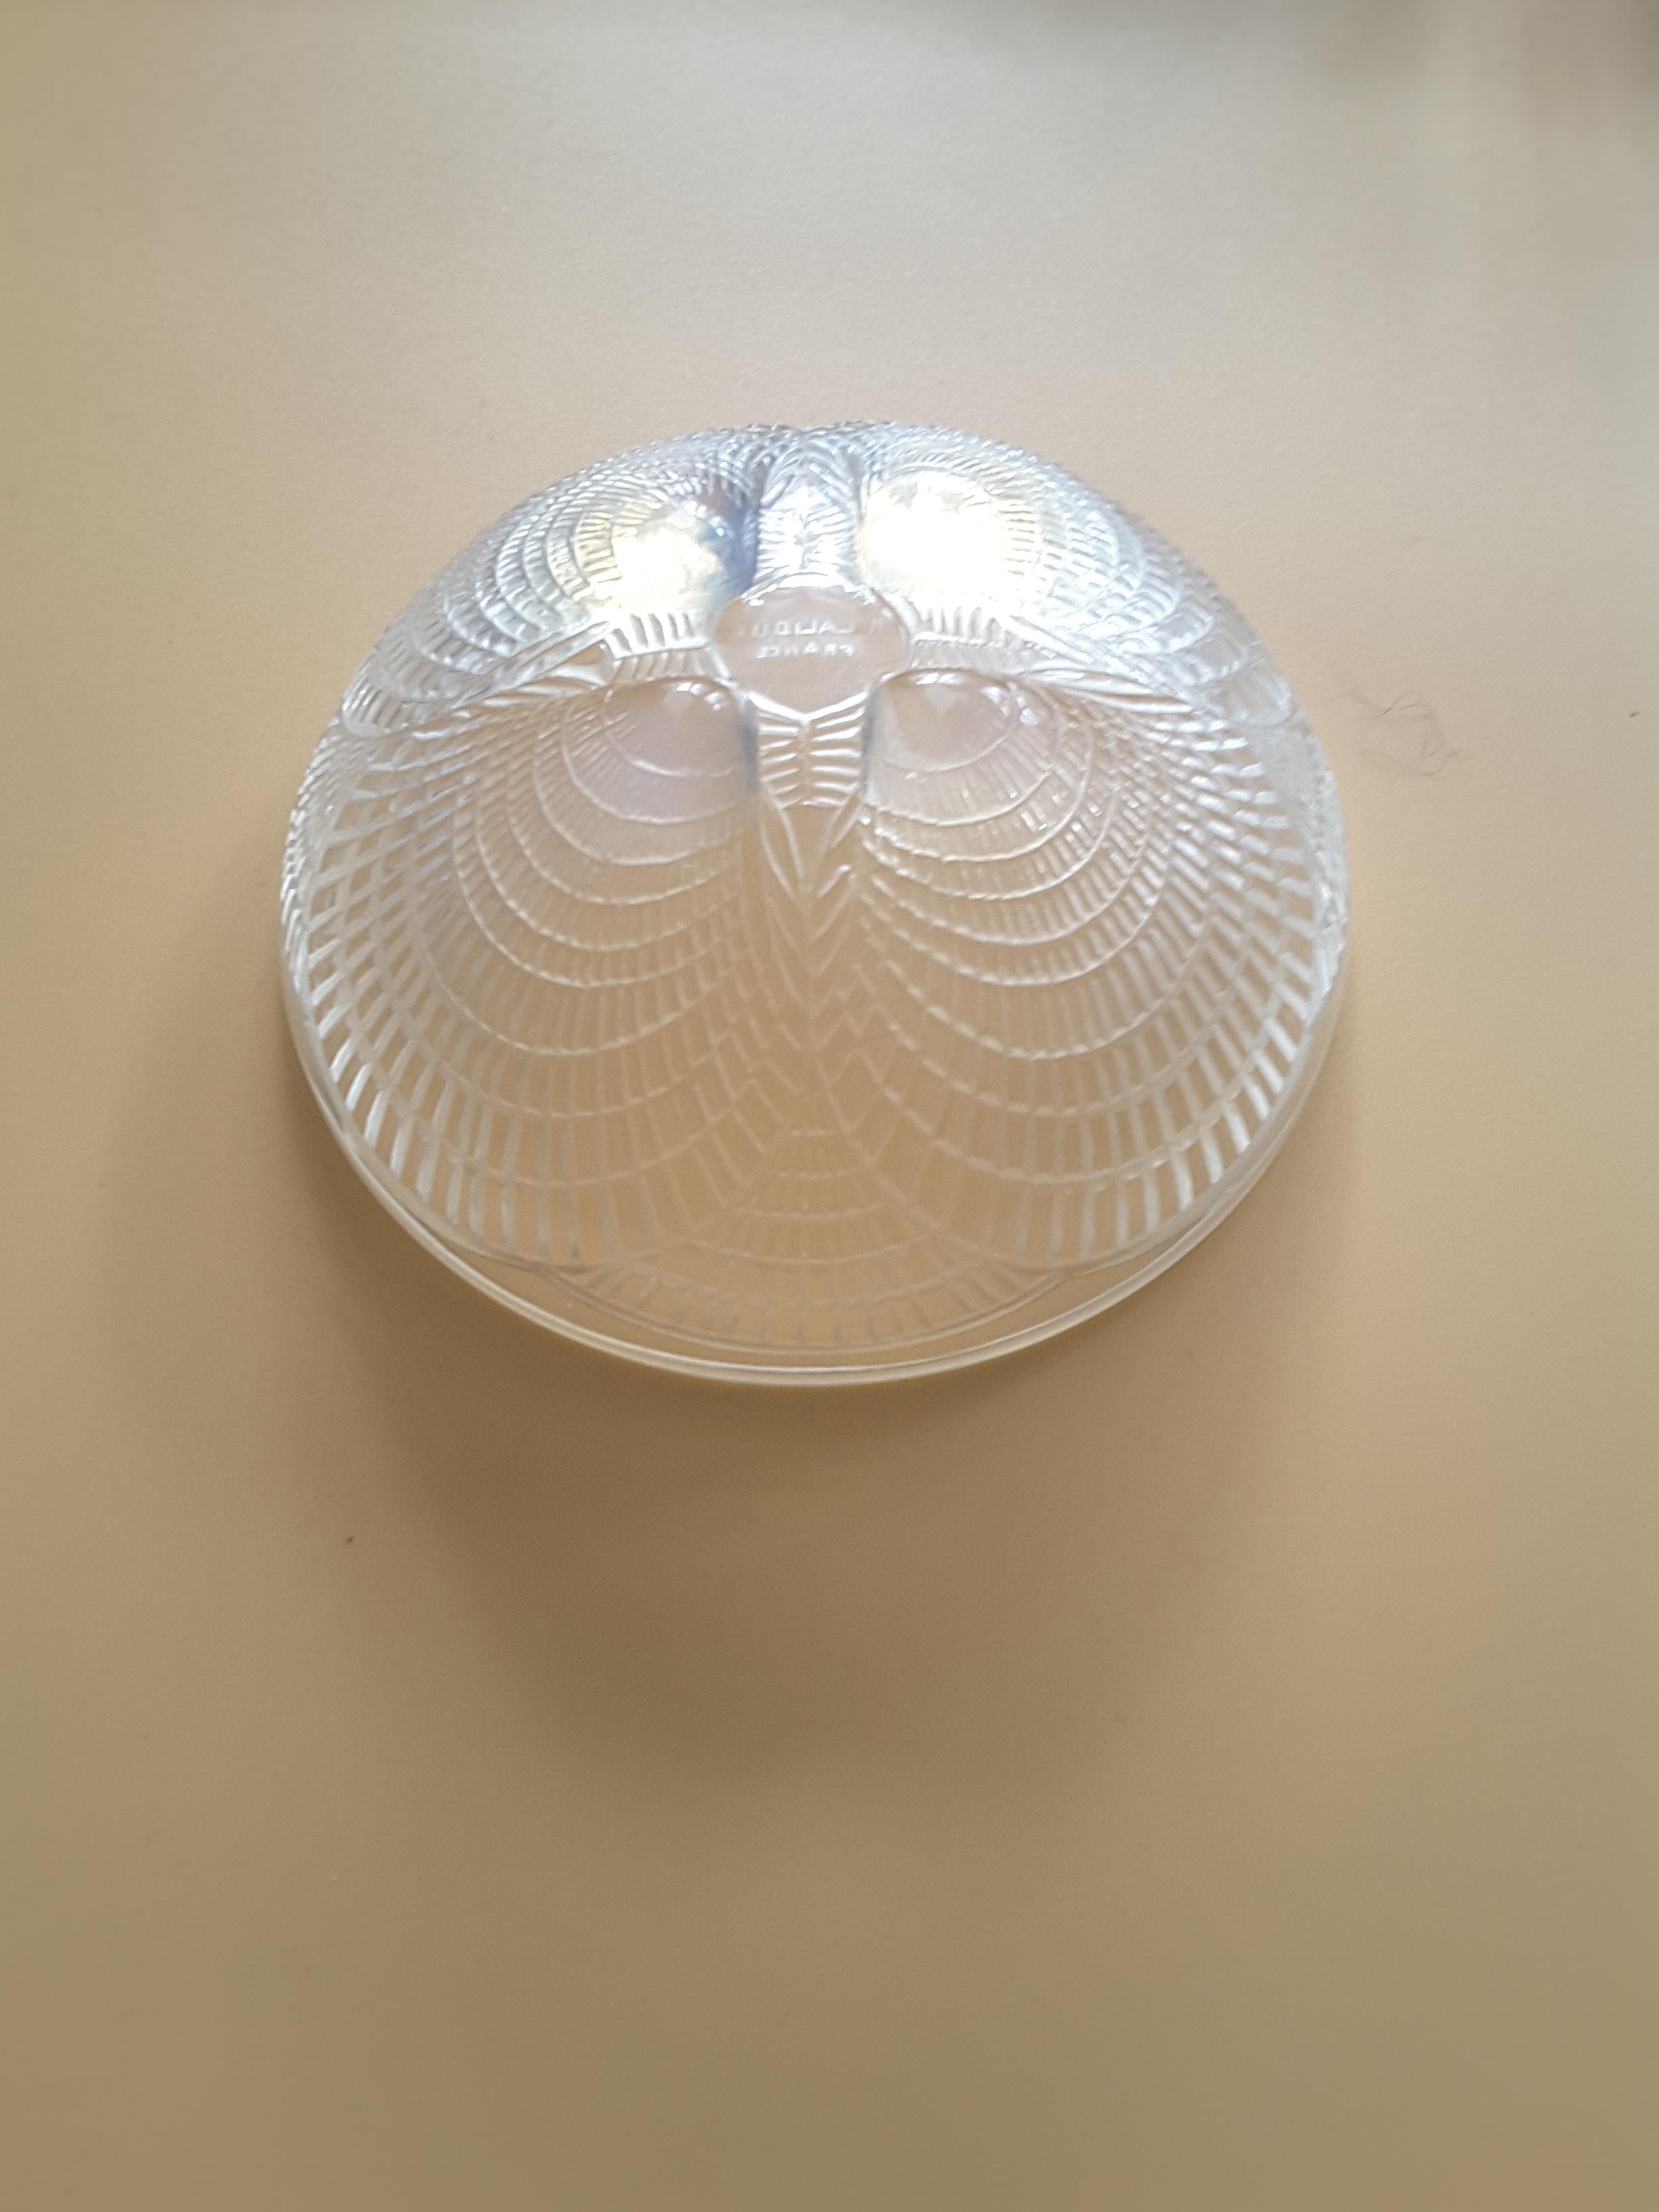 Lalique Glass Bowl - Image 5 of 6